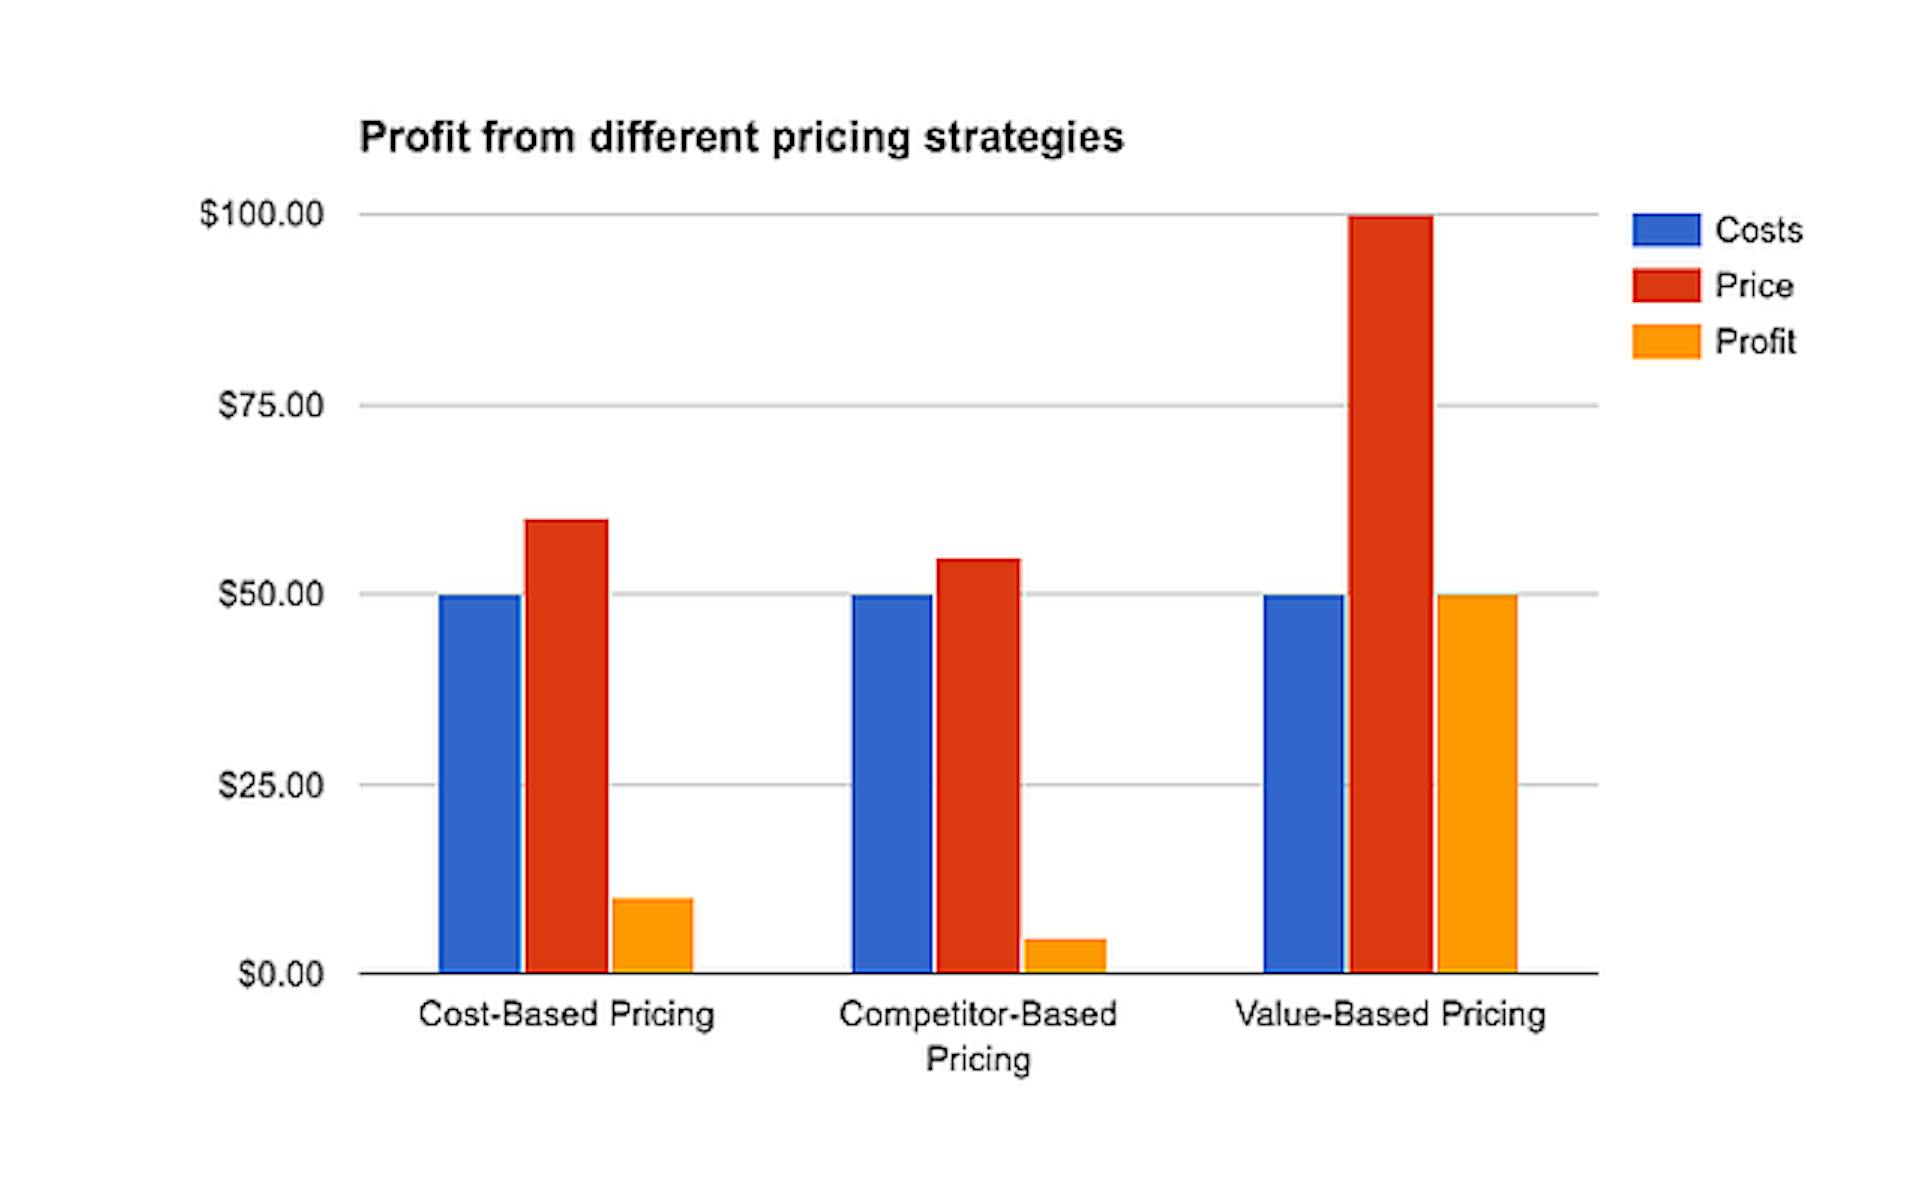 The cost, price and profit from three different pricing strategies (cost-based, competitor-based and value-based) shows higher price and profit for value-based